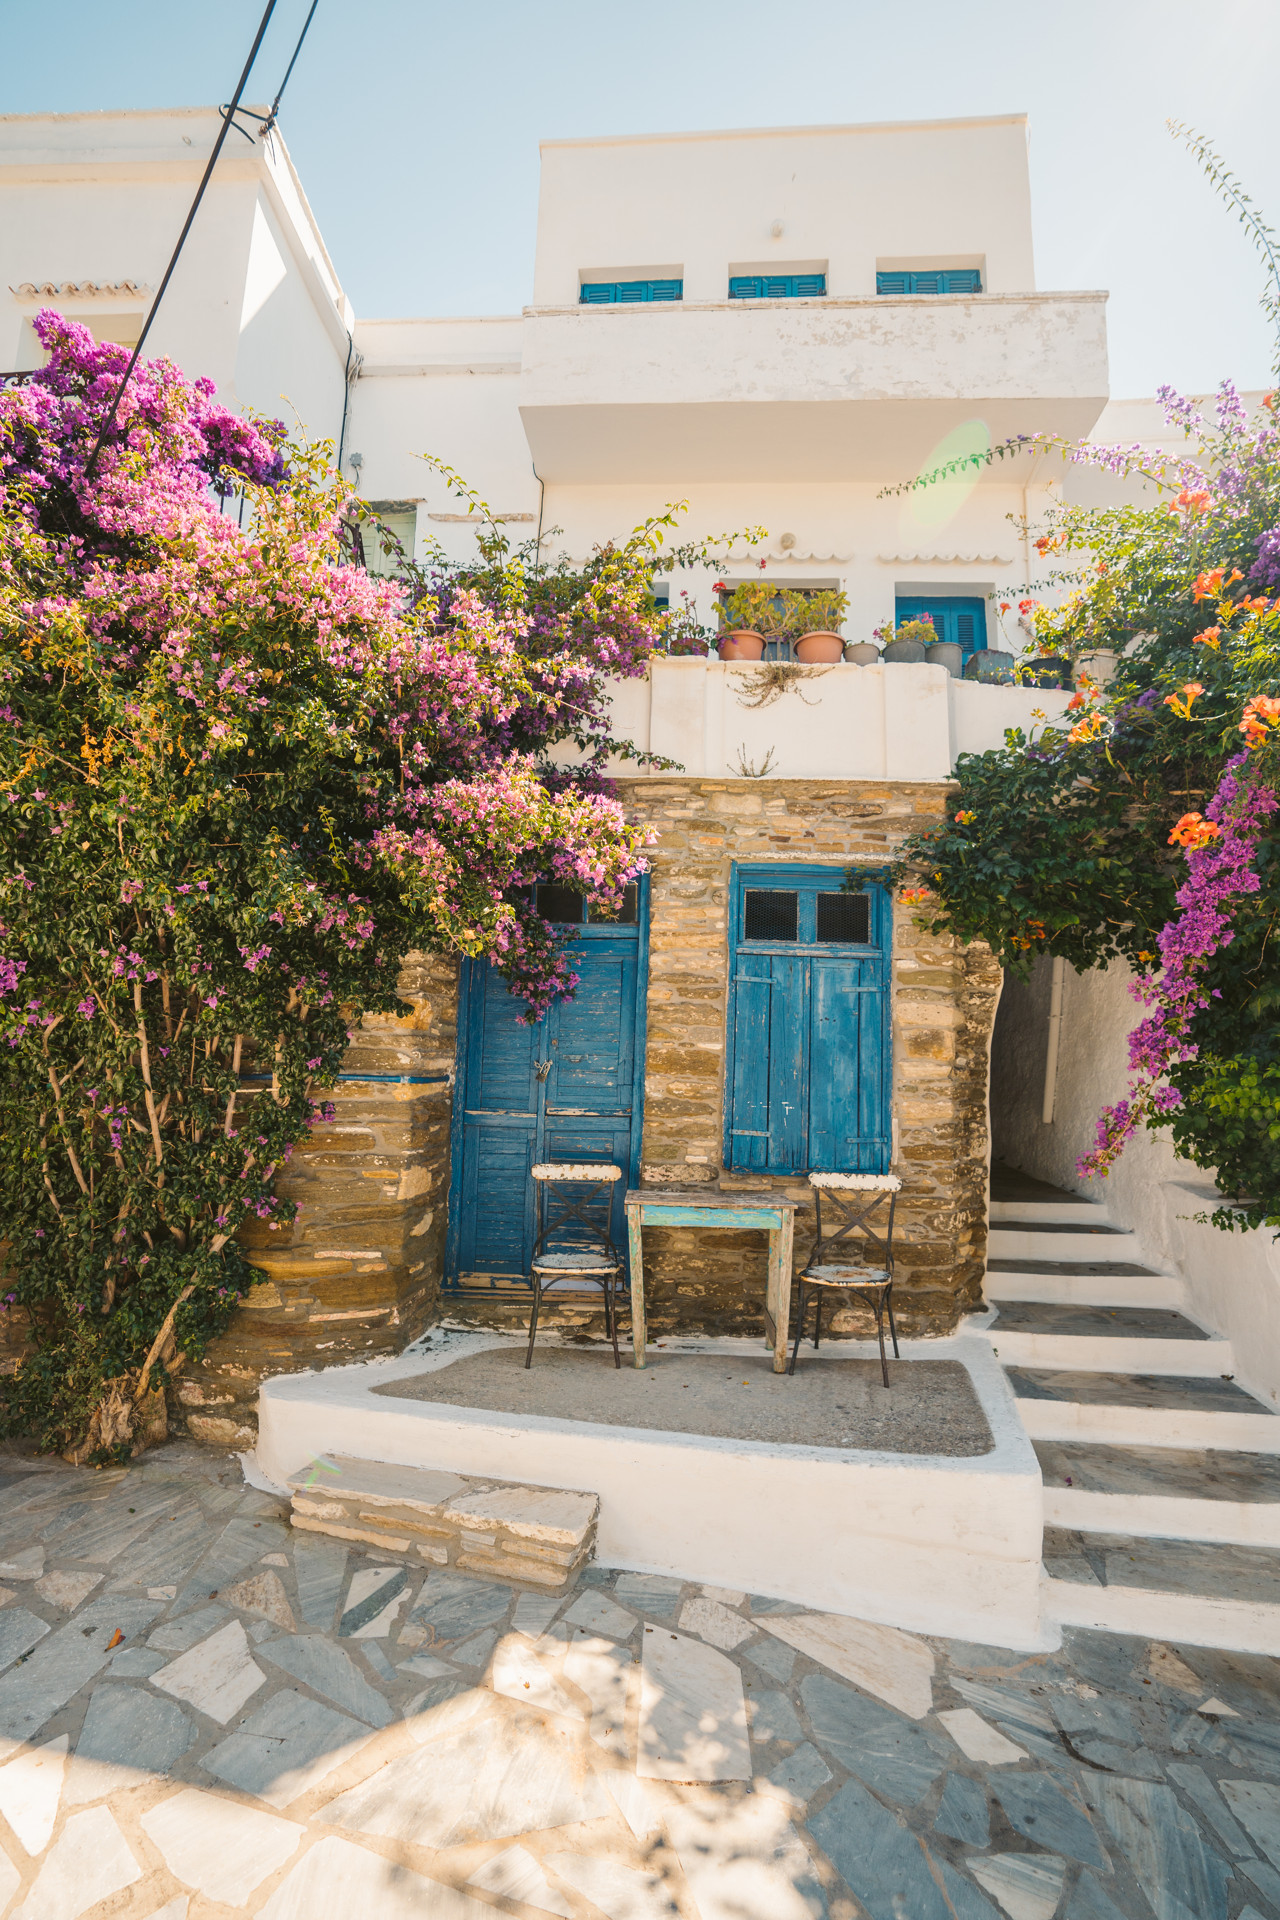 The villages of Tinos are full of idyllic little alleyways and bougainvillea-filled courtyards